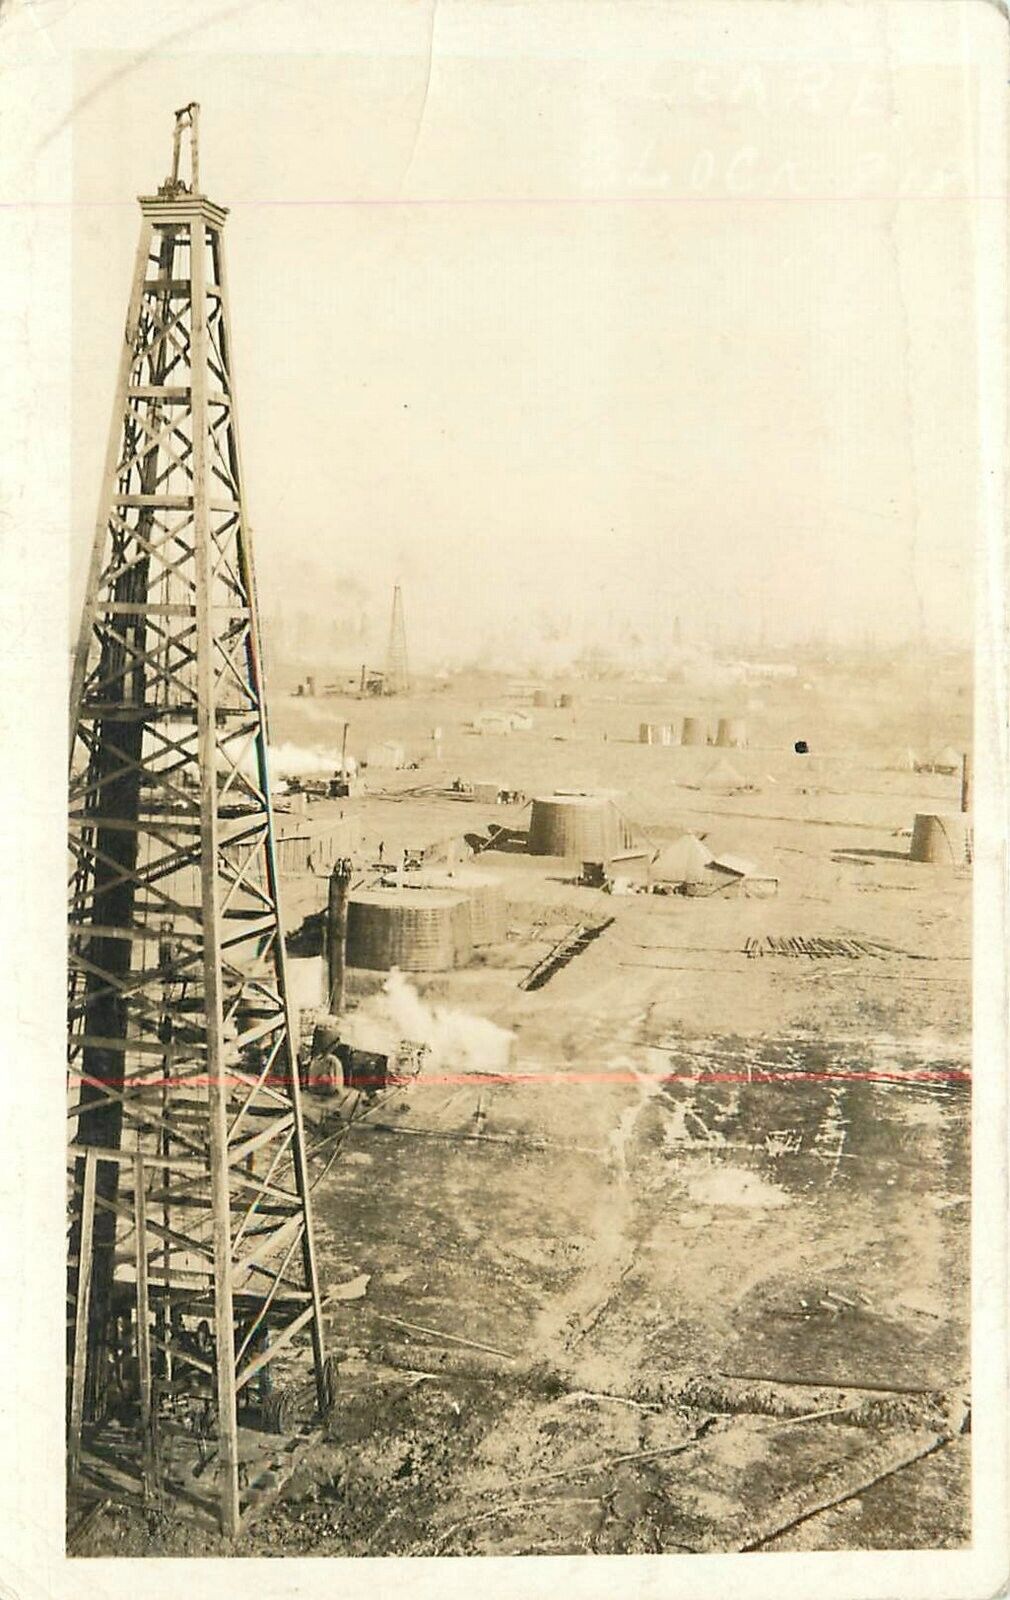 Postcard RPPC 1920s Oil Industry View from Derrick TP24-1956